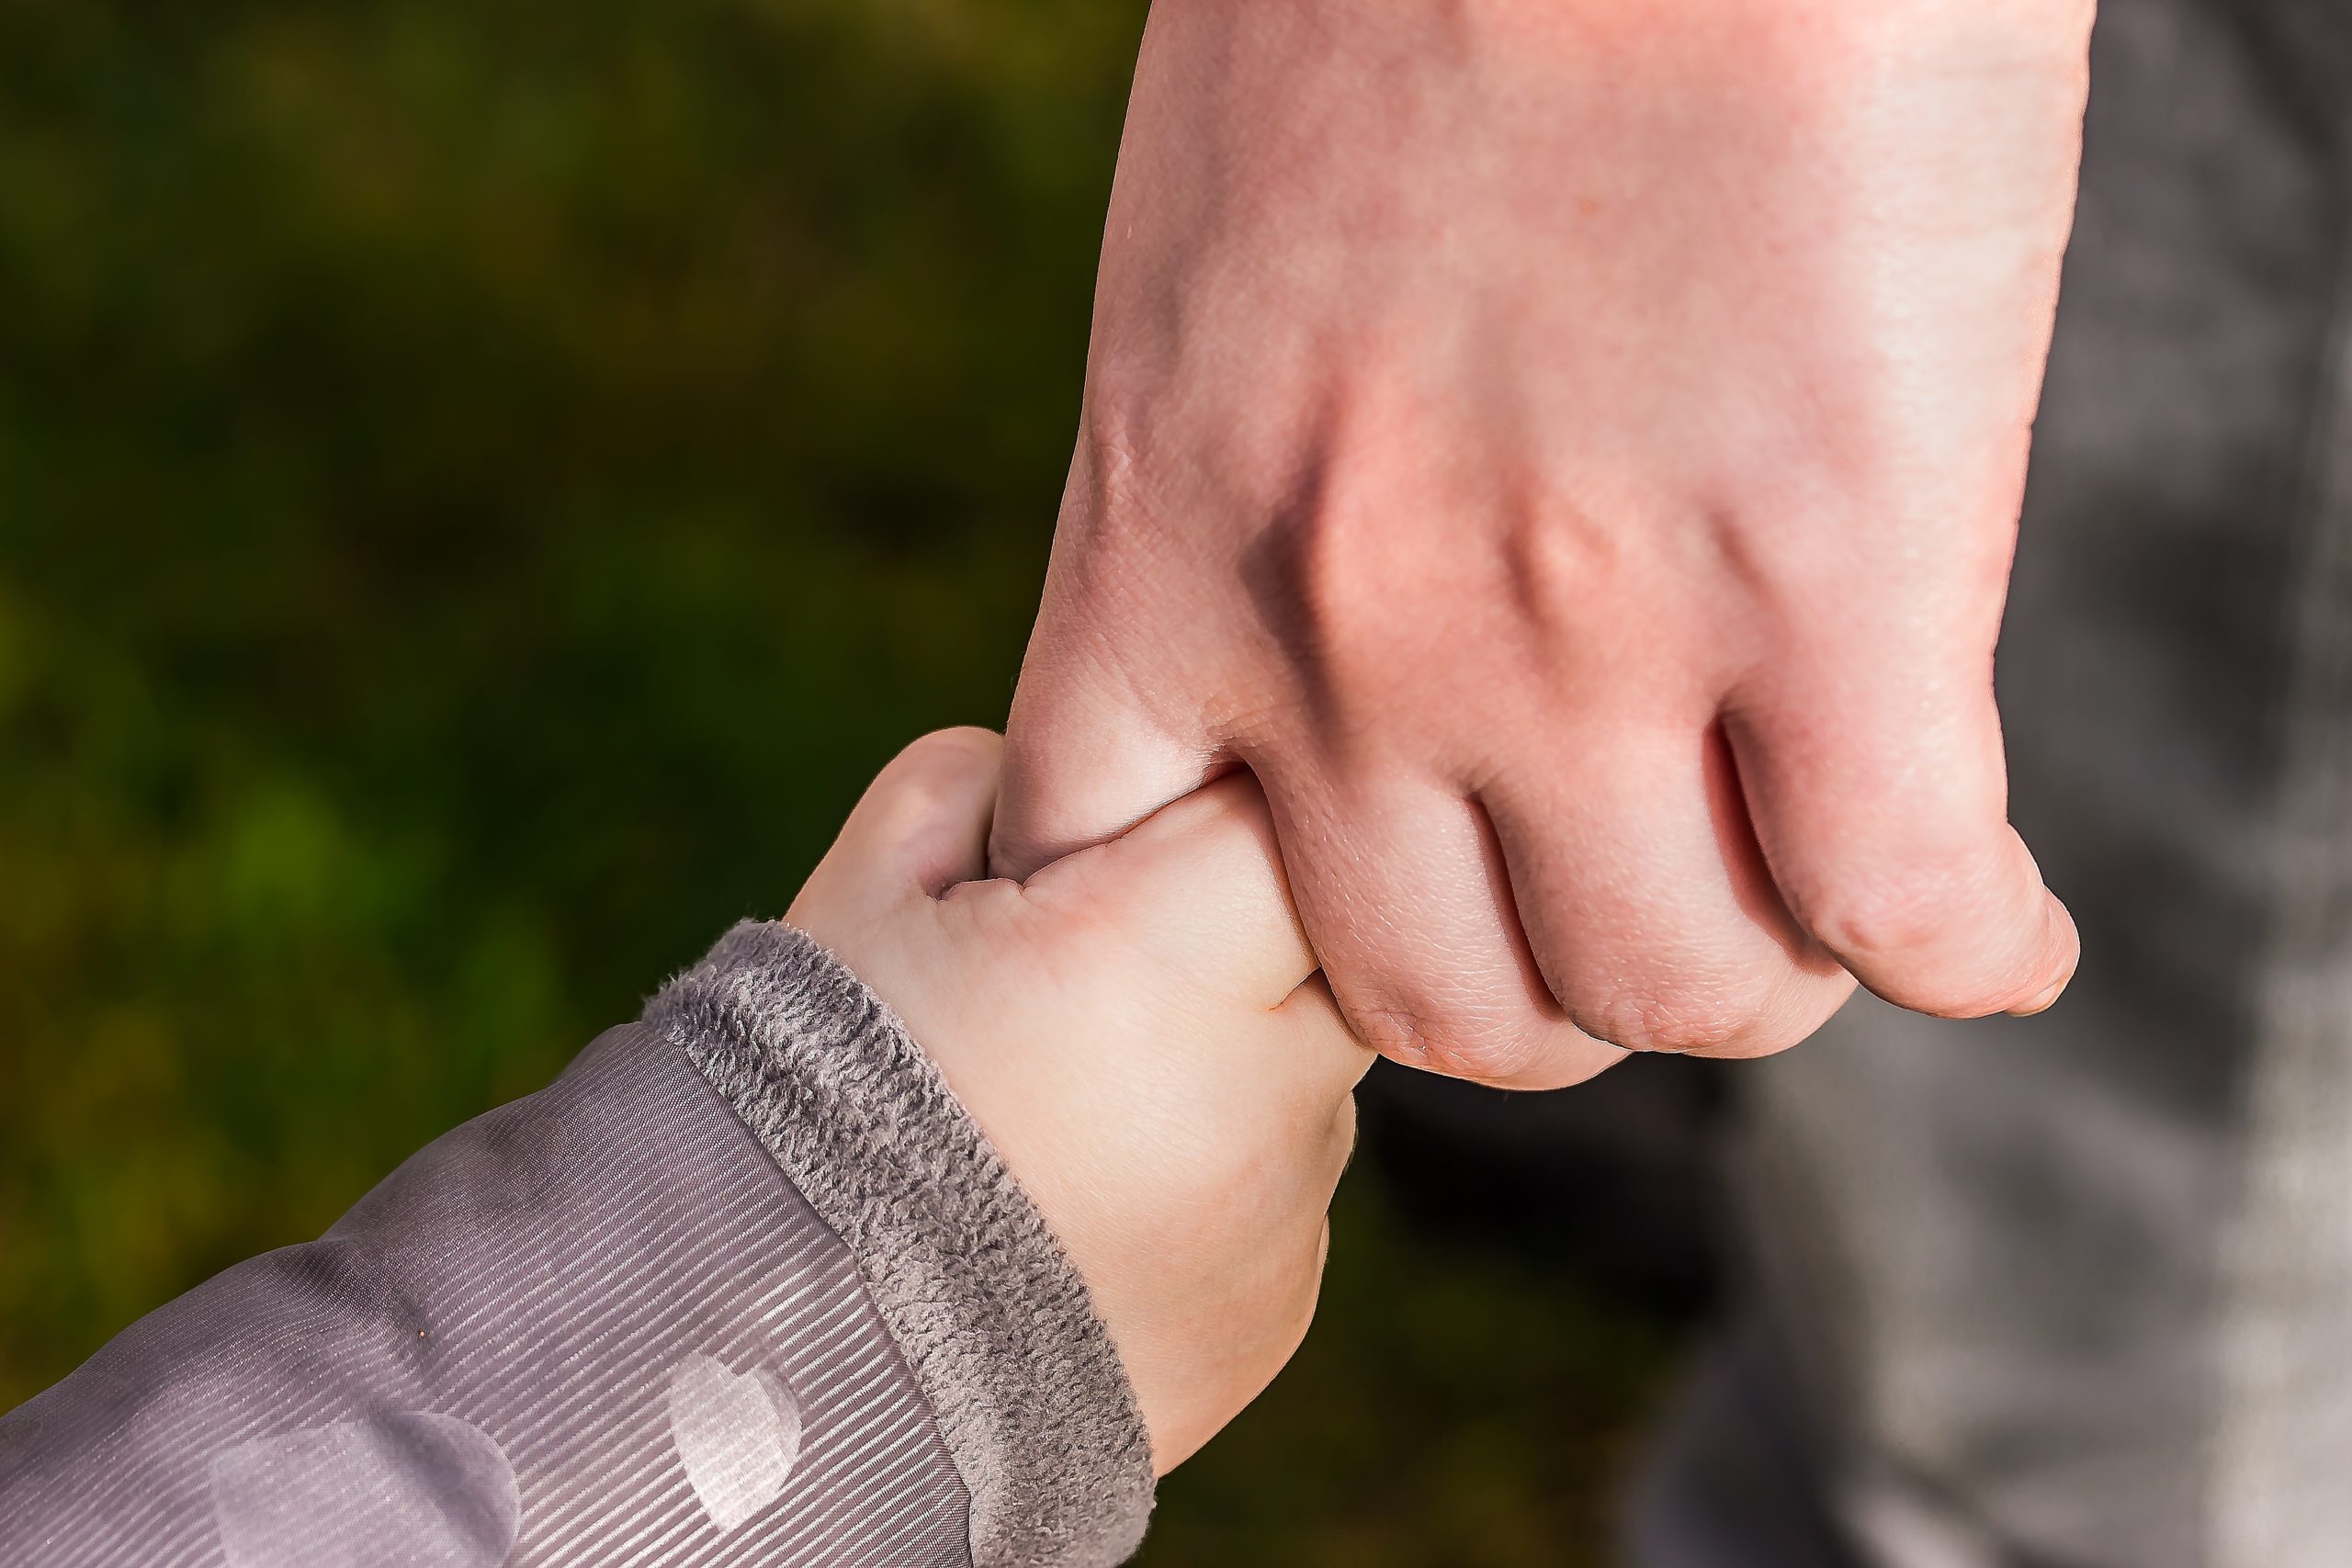 3 Tips for Navigating Child Custody as COVID-19 Continues